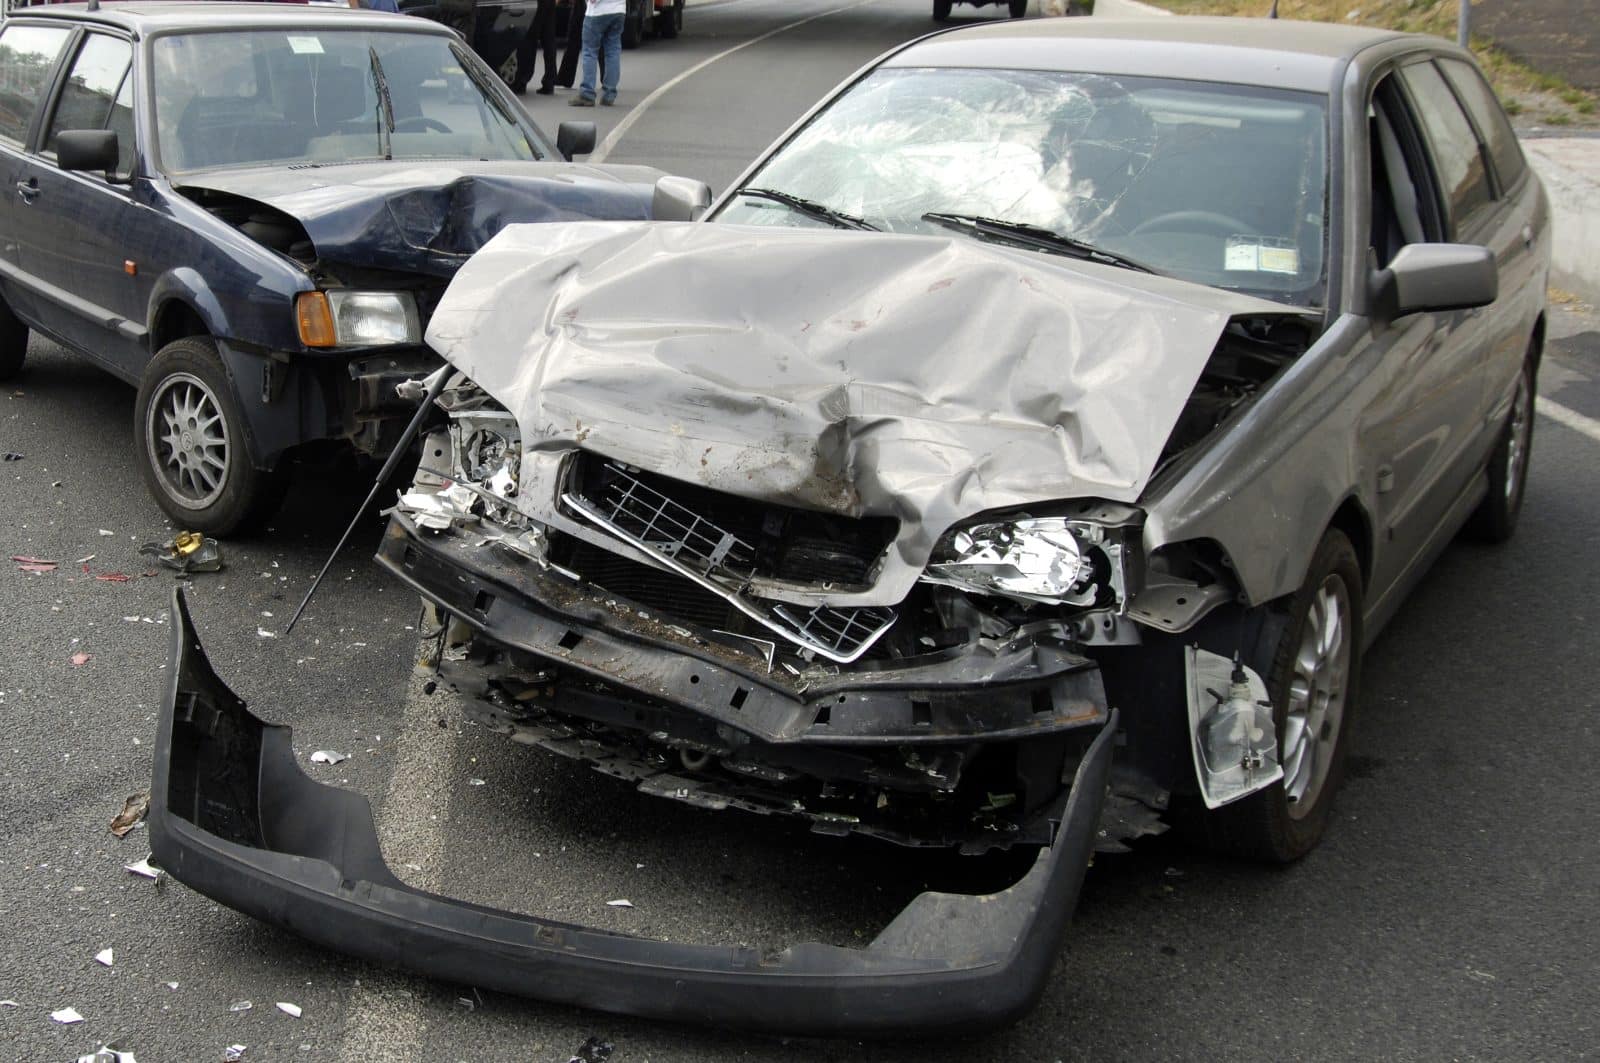 Seek assistance from the best car accident lawyer in Odessa, Texas.